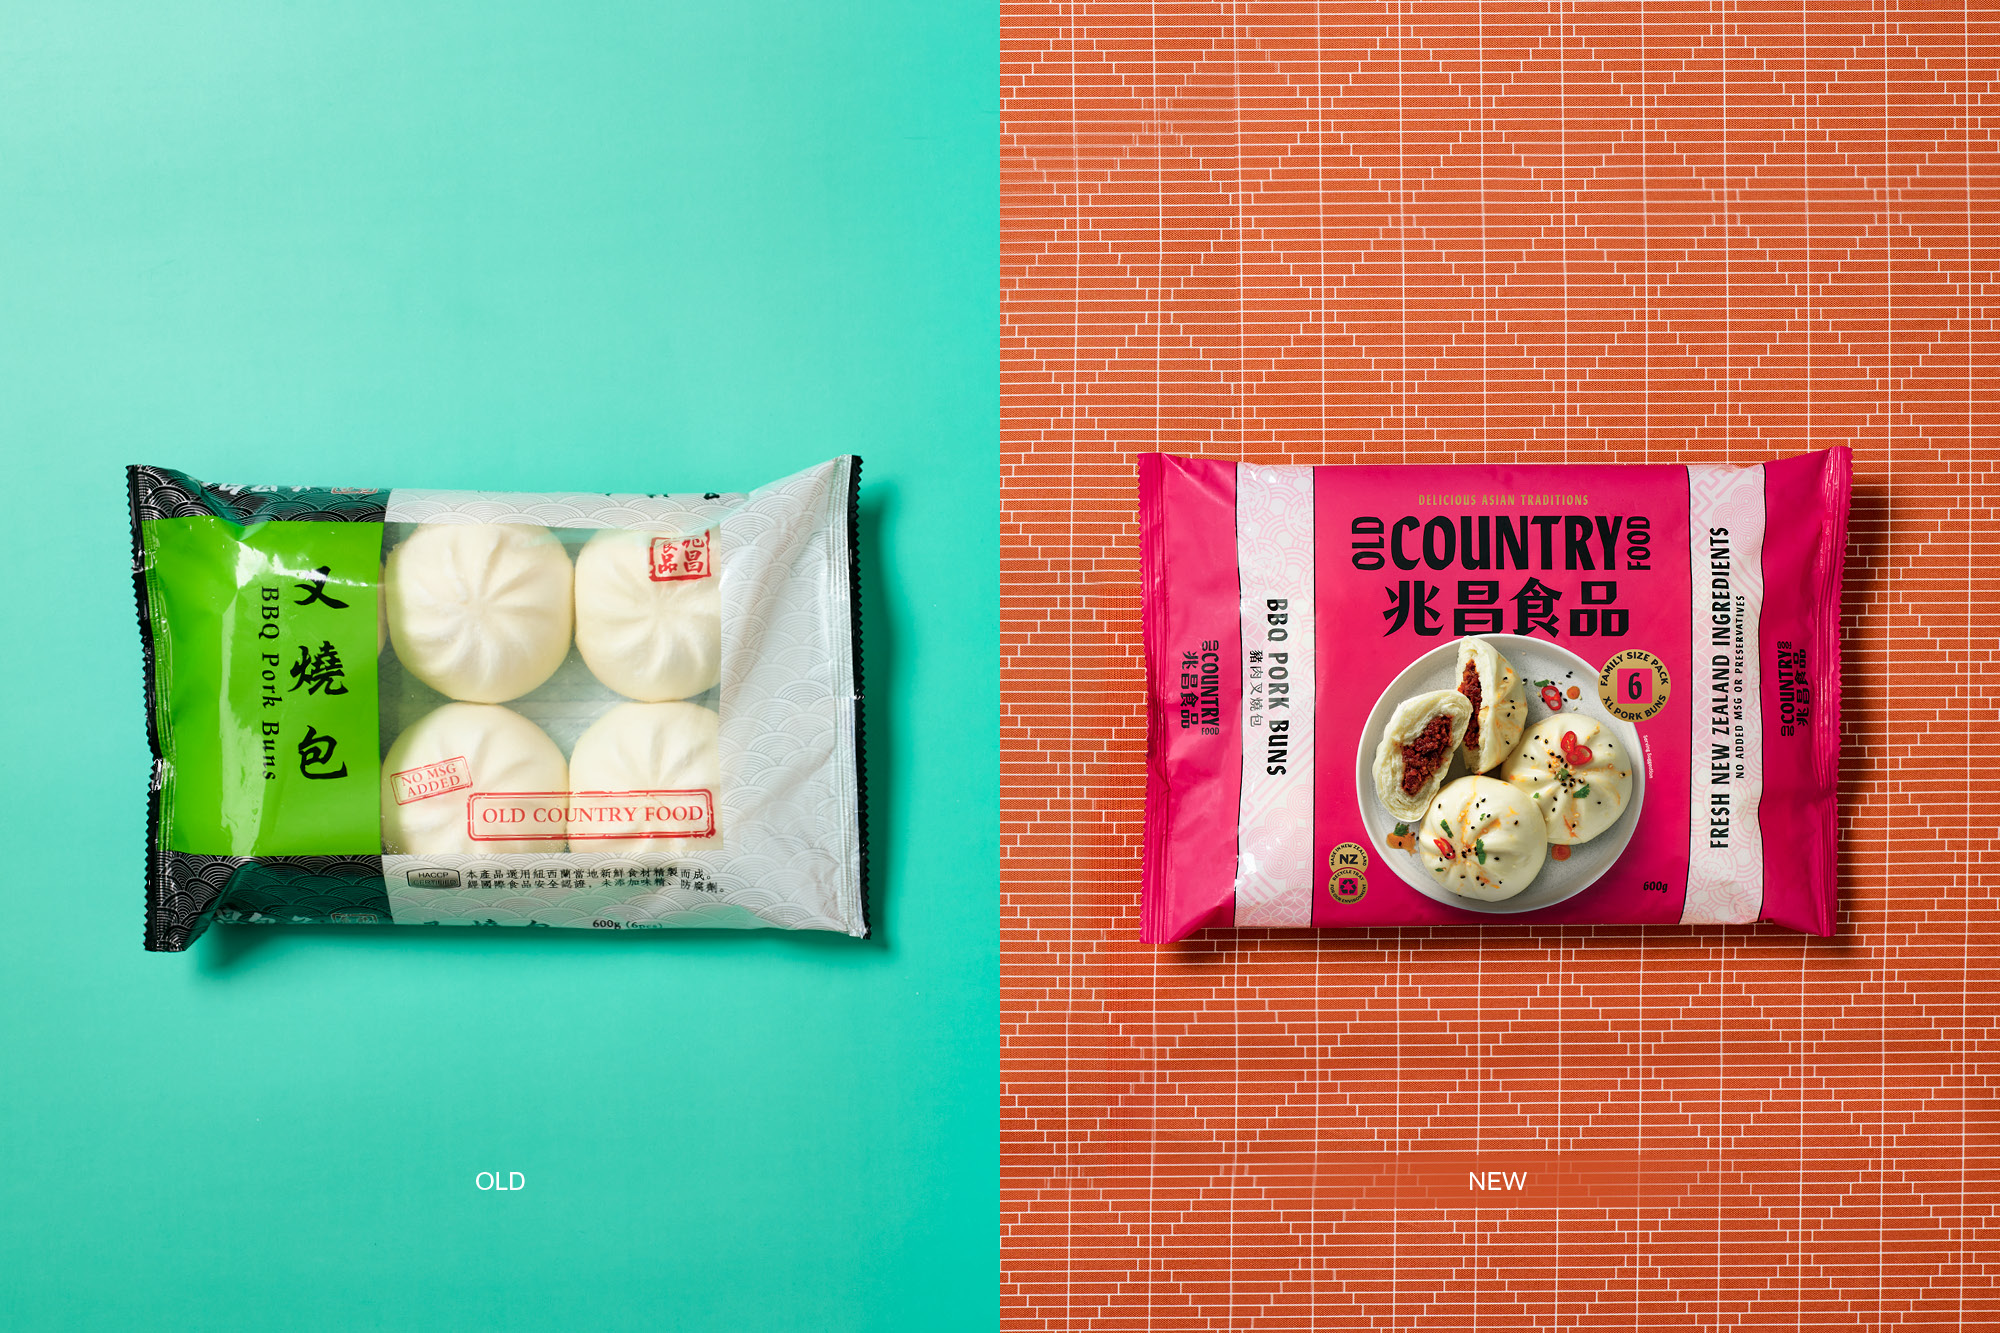 old country food packaging design onfire design auckland12